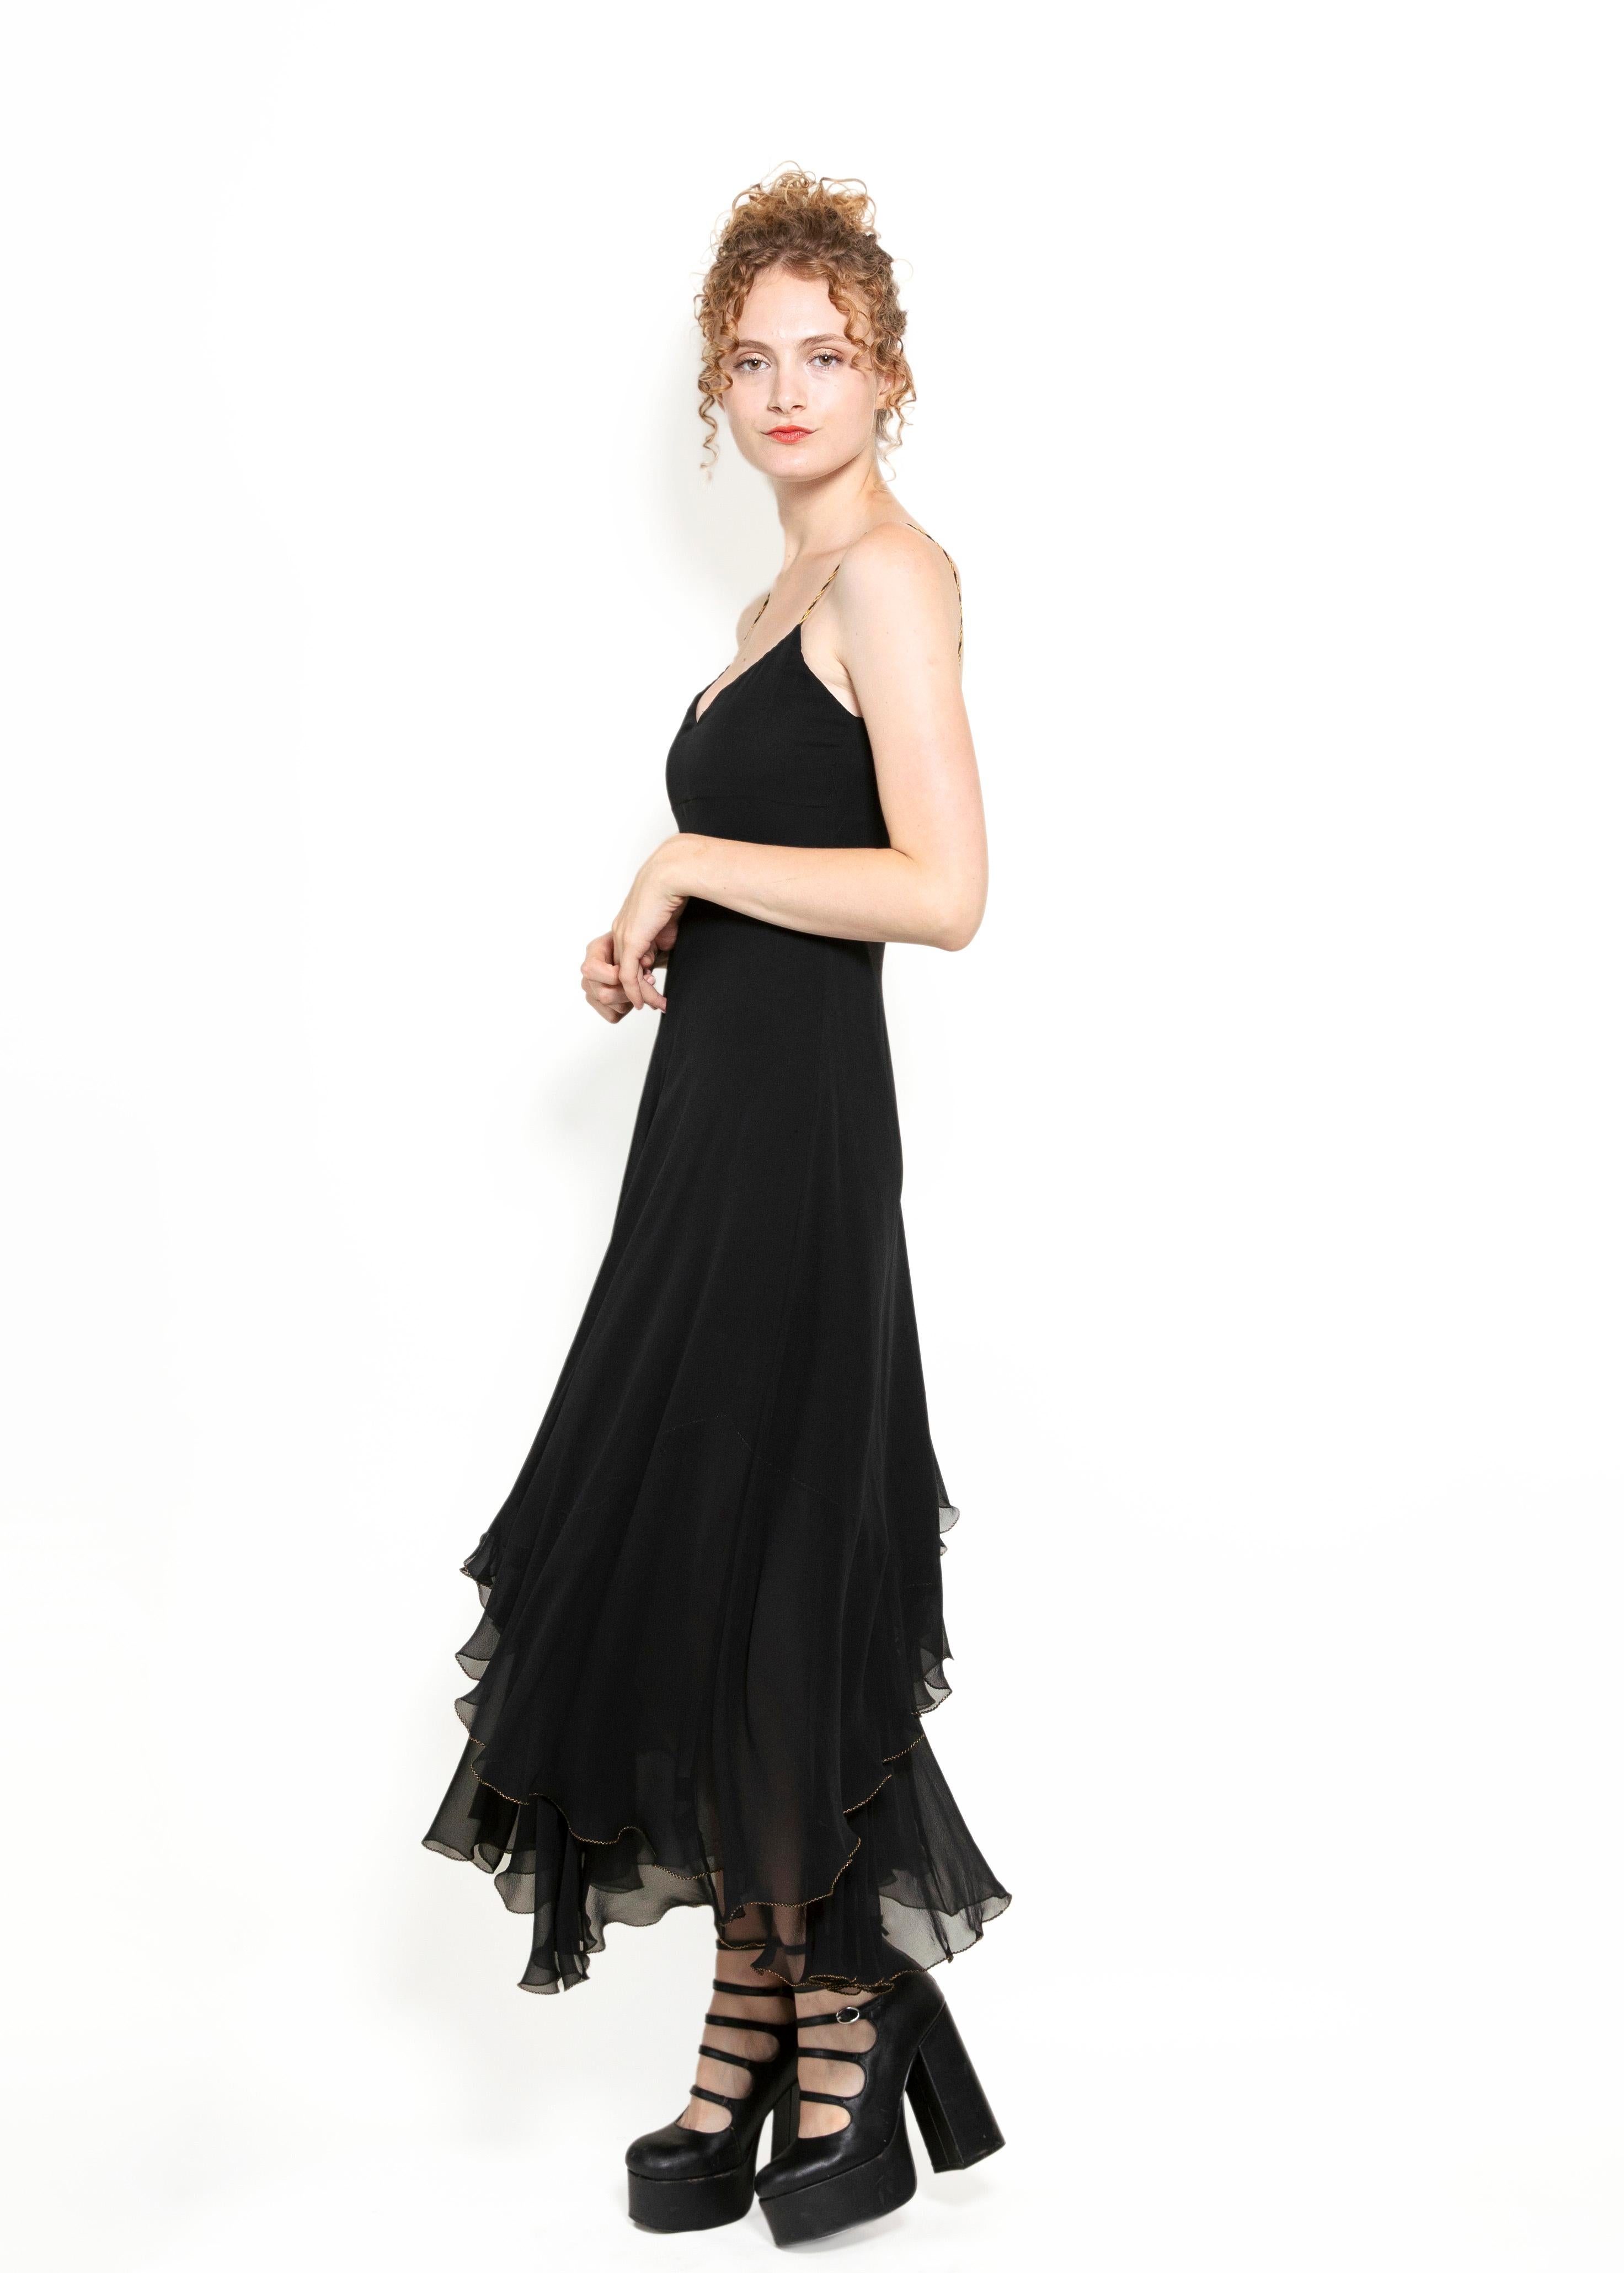 Take a daring plunge into opulence with this Ralph Lauren Black Silk Chiffon, featuring luxe gold and black braided straps for a touch of grandeur. Embrace courage and style with the bold and beautiful ruffle and layer design. Show off your daring